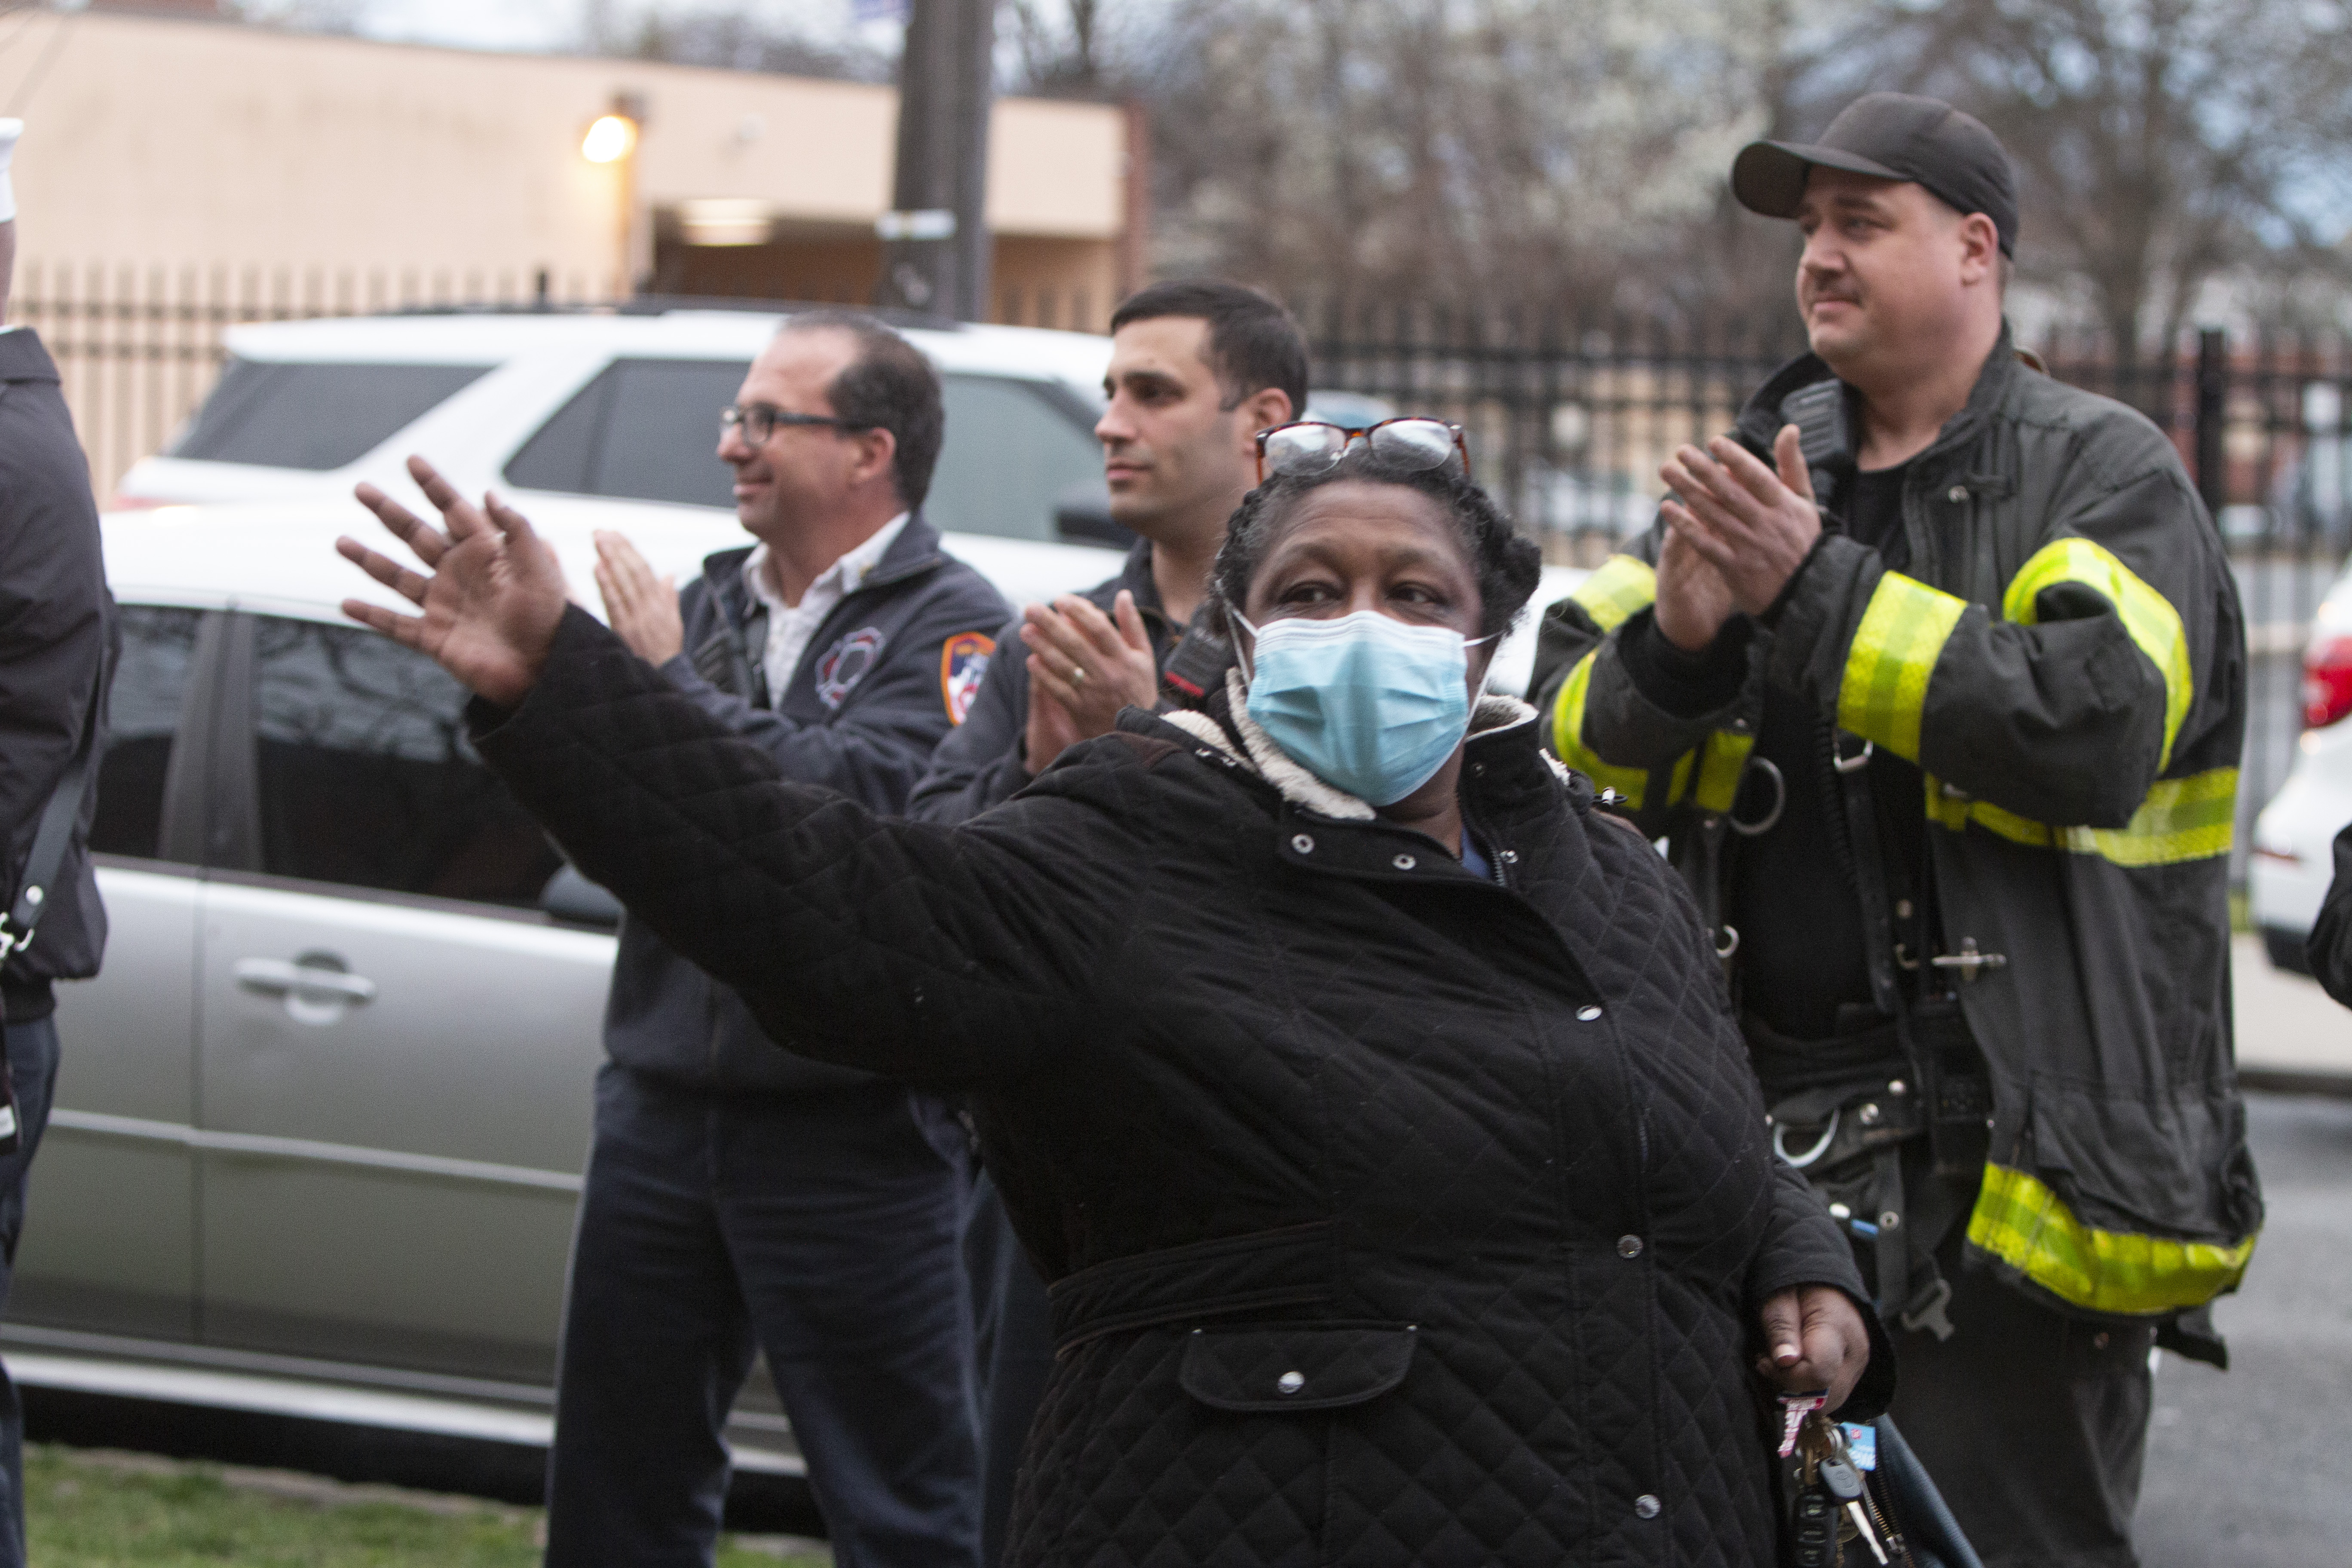 First responders gathered outside Richmond University Hospital on Friday, April 3, 2020 to applaud the hospital's staff. (Staten Island Advance/ Paul Liotta)